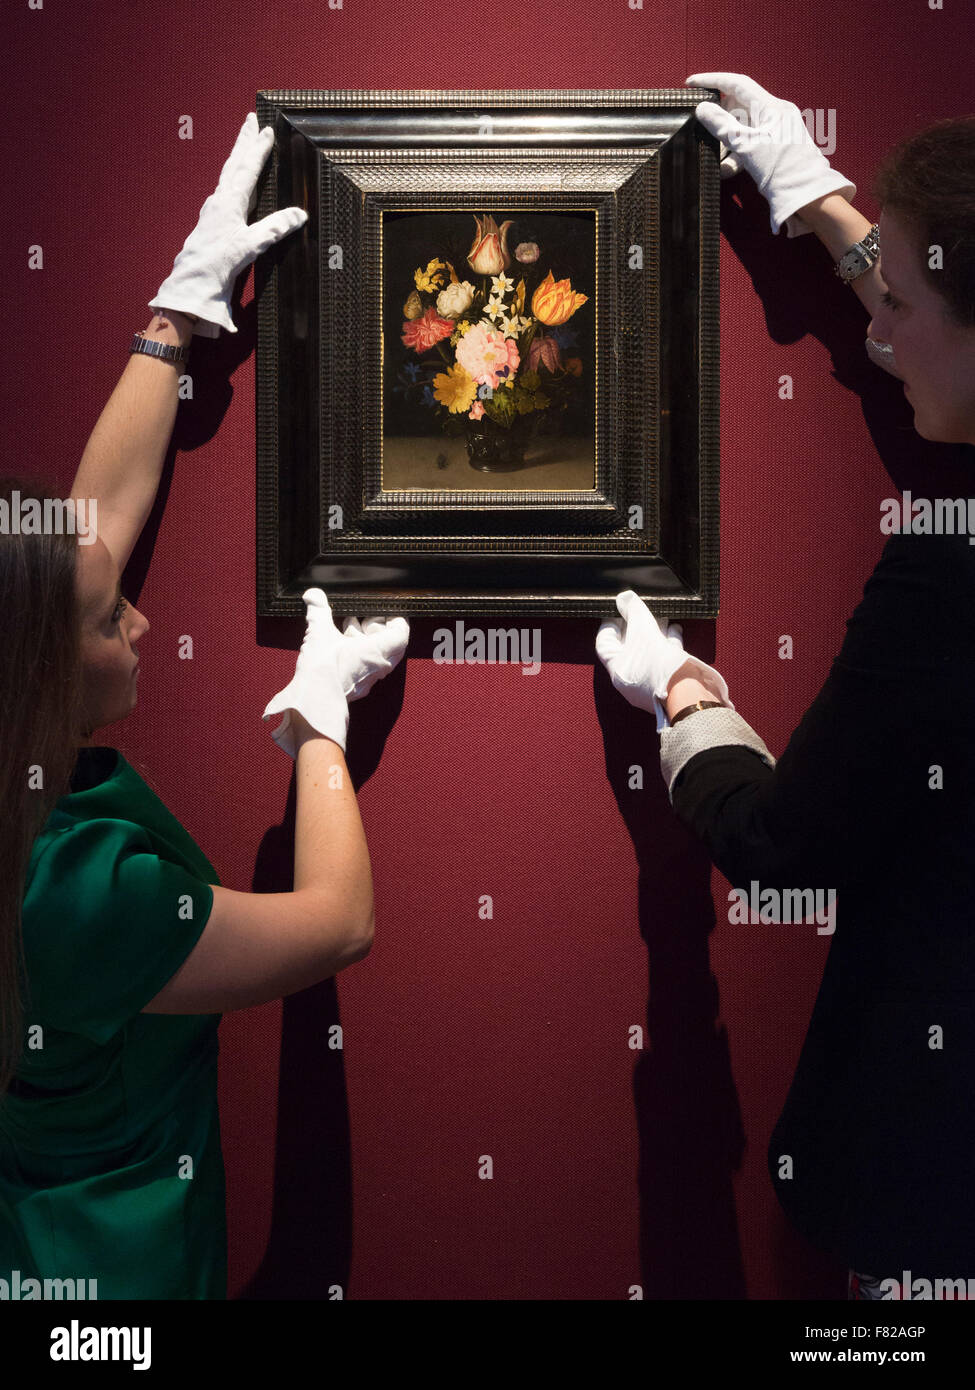 London, UK. 4 December 2015. Flower still life by Ambrosius Bosschaert the Elder, estimate: GBP 600,000-800,000. Christie's are re-examining nature, still life and Venice in the Old Master and British Paintings evening sale on 8 December 2015 in London. At this sale a large selection of paintings from private collections will be offered at auction, some of which have never been offered at auction before. Stock Photo